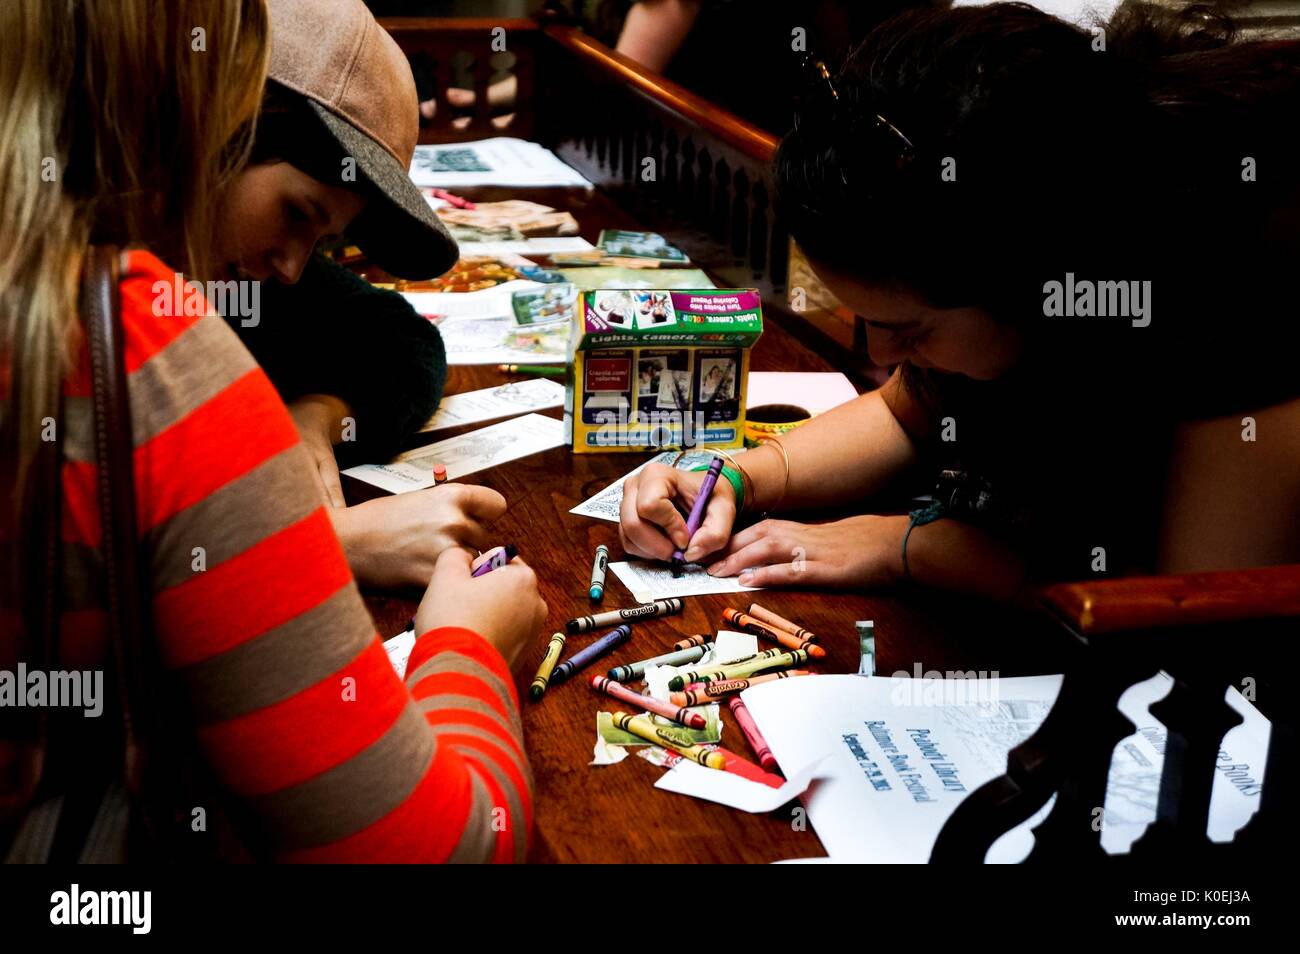 College students sit at an old wooden desk coloring bookmarks with crayons at the Baltimore Book Festival, a large festival where authors and readers come together for signings and readings, hosted at the historic George Peabody Library at Johns Hopkins University, Baltimore, Maryland, 2013. Courtesy Eric Chen. Stock Photo